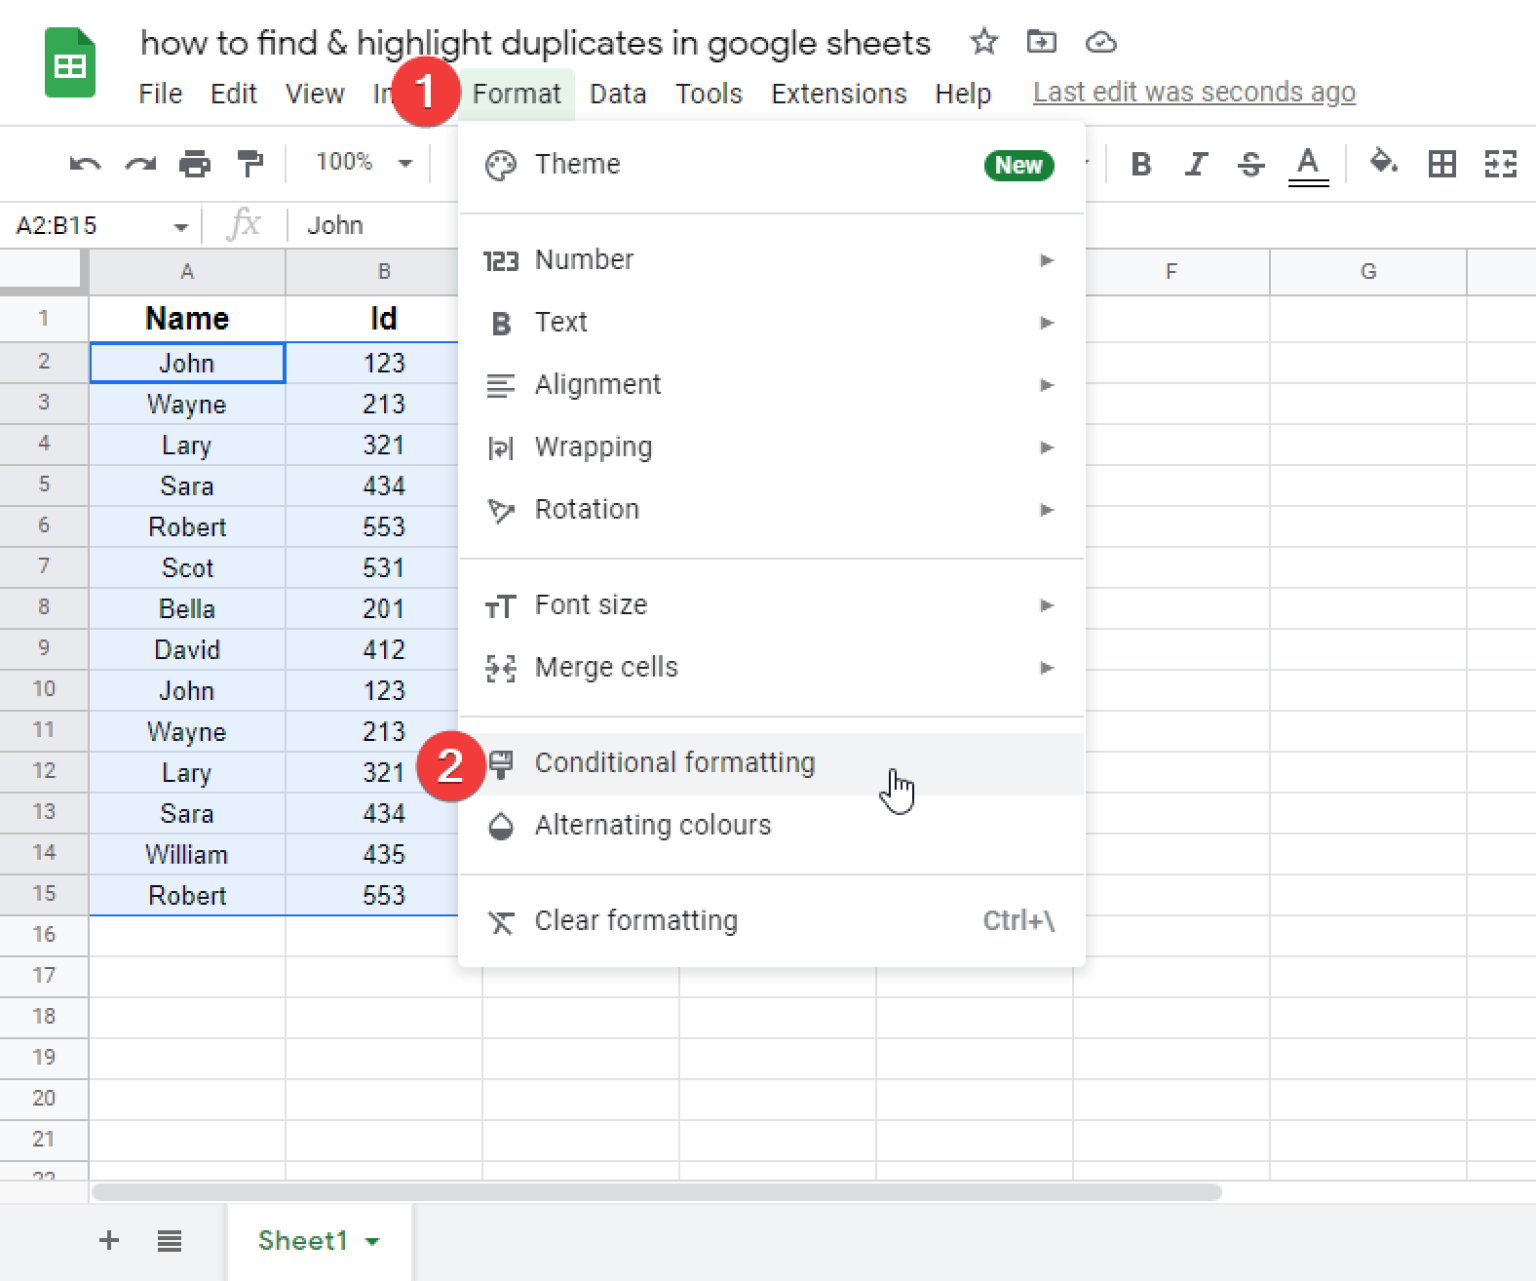 How To Find Highlight Duplicates In Google Sheets 6 1536x1281 